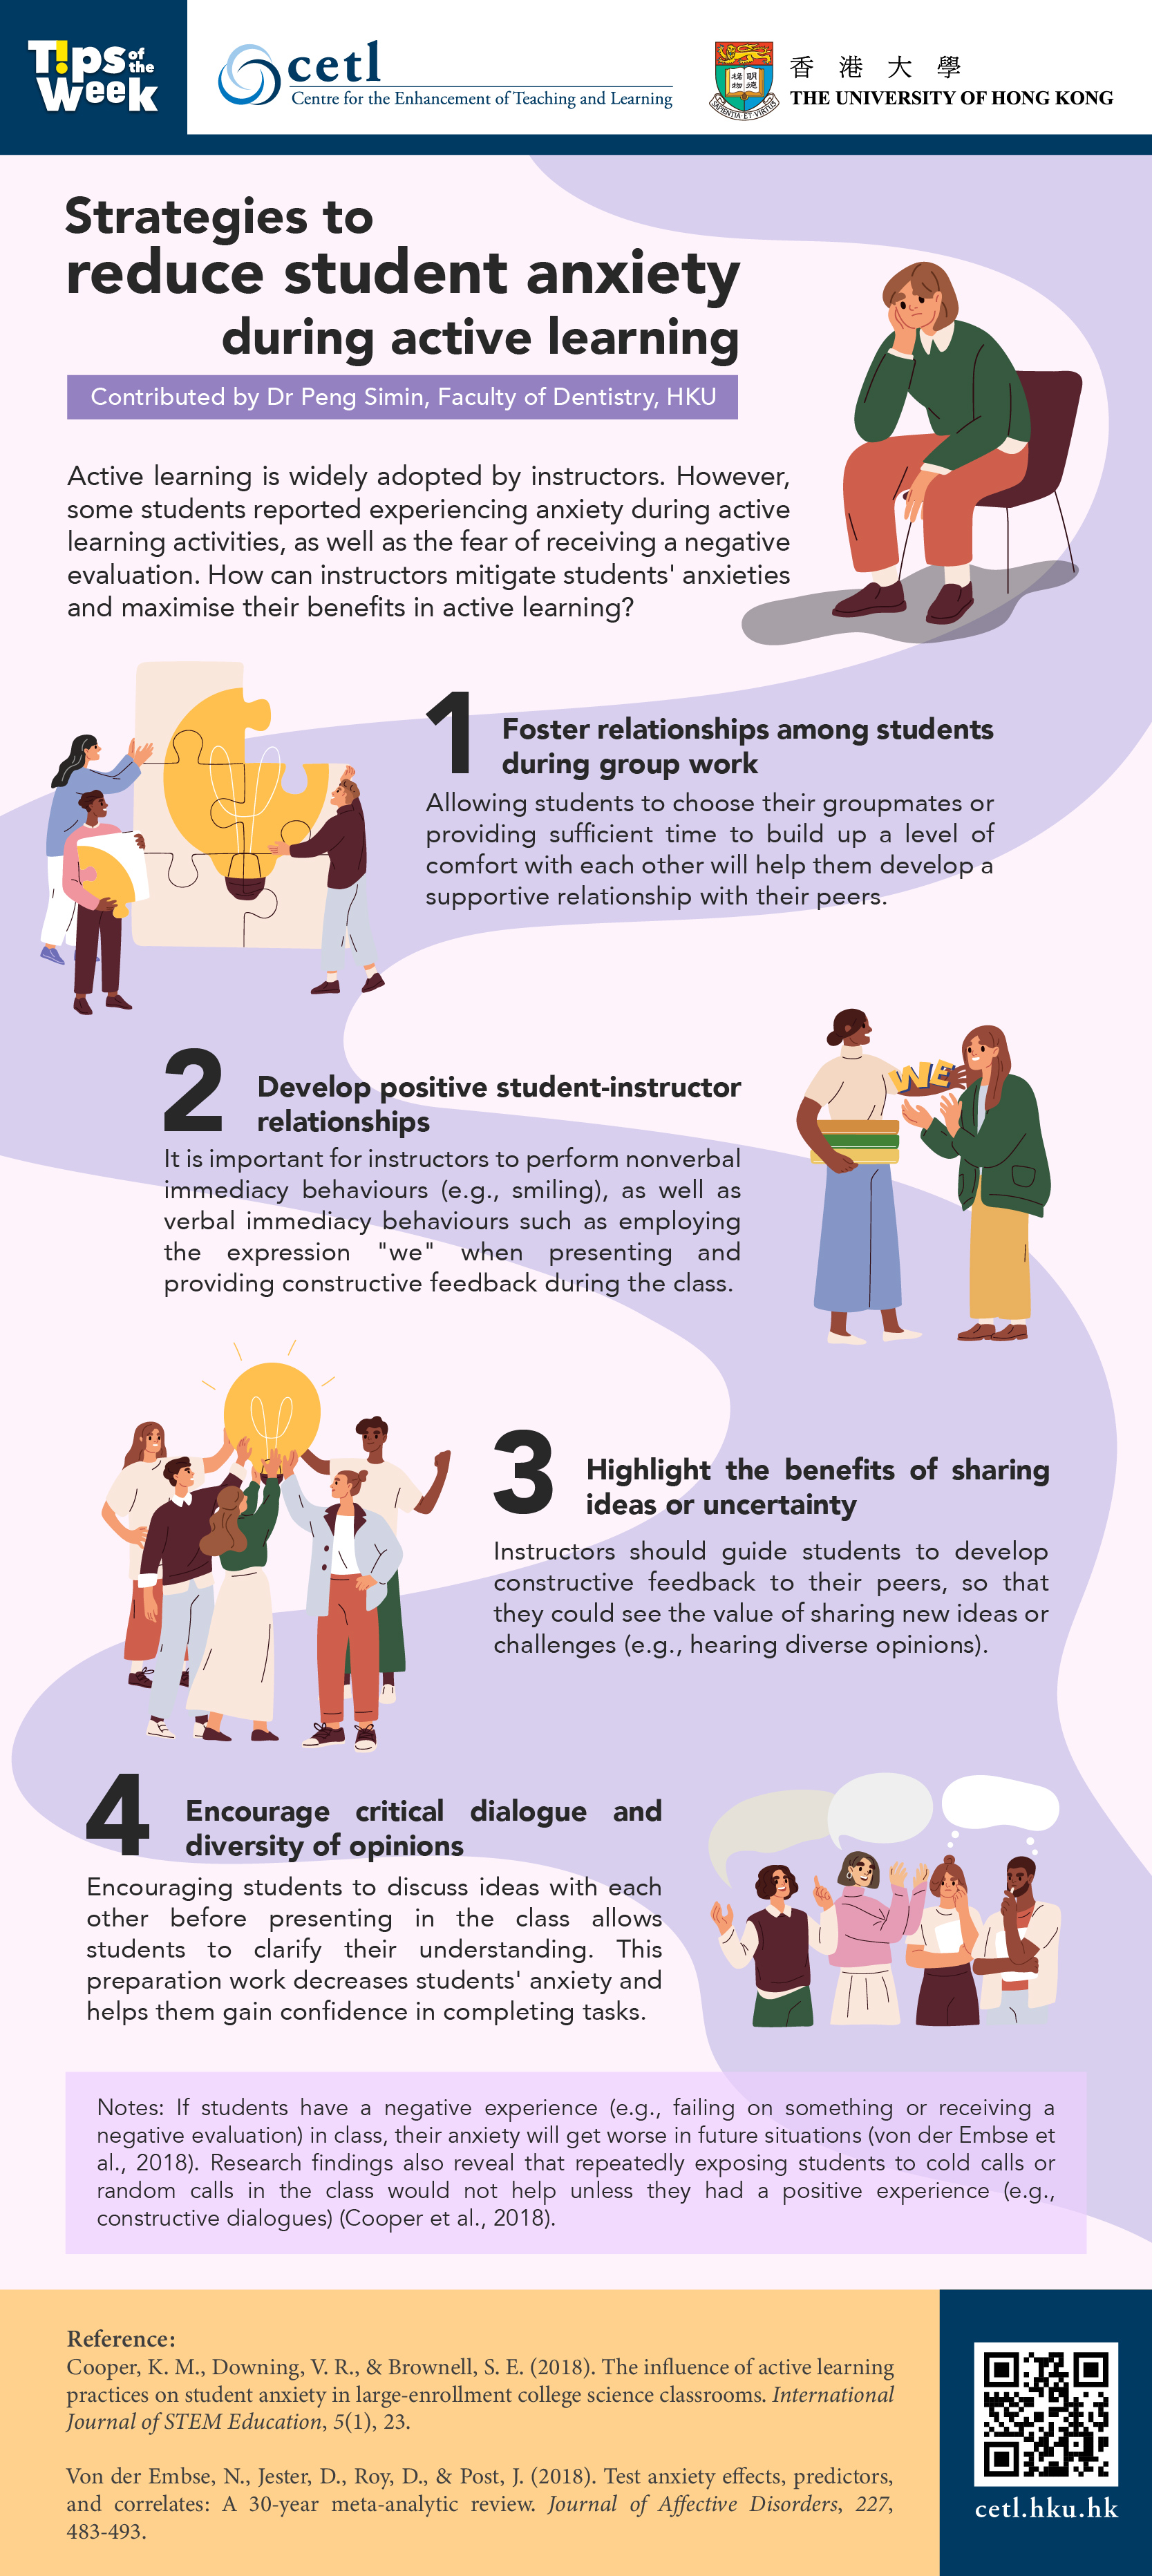 Strategies to reduce student anxiety during active learning